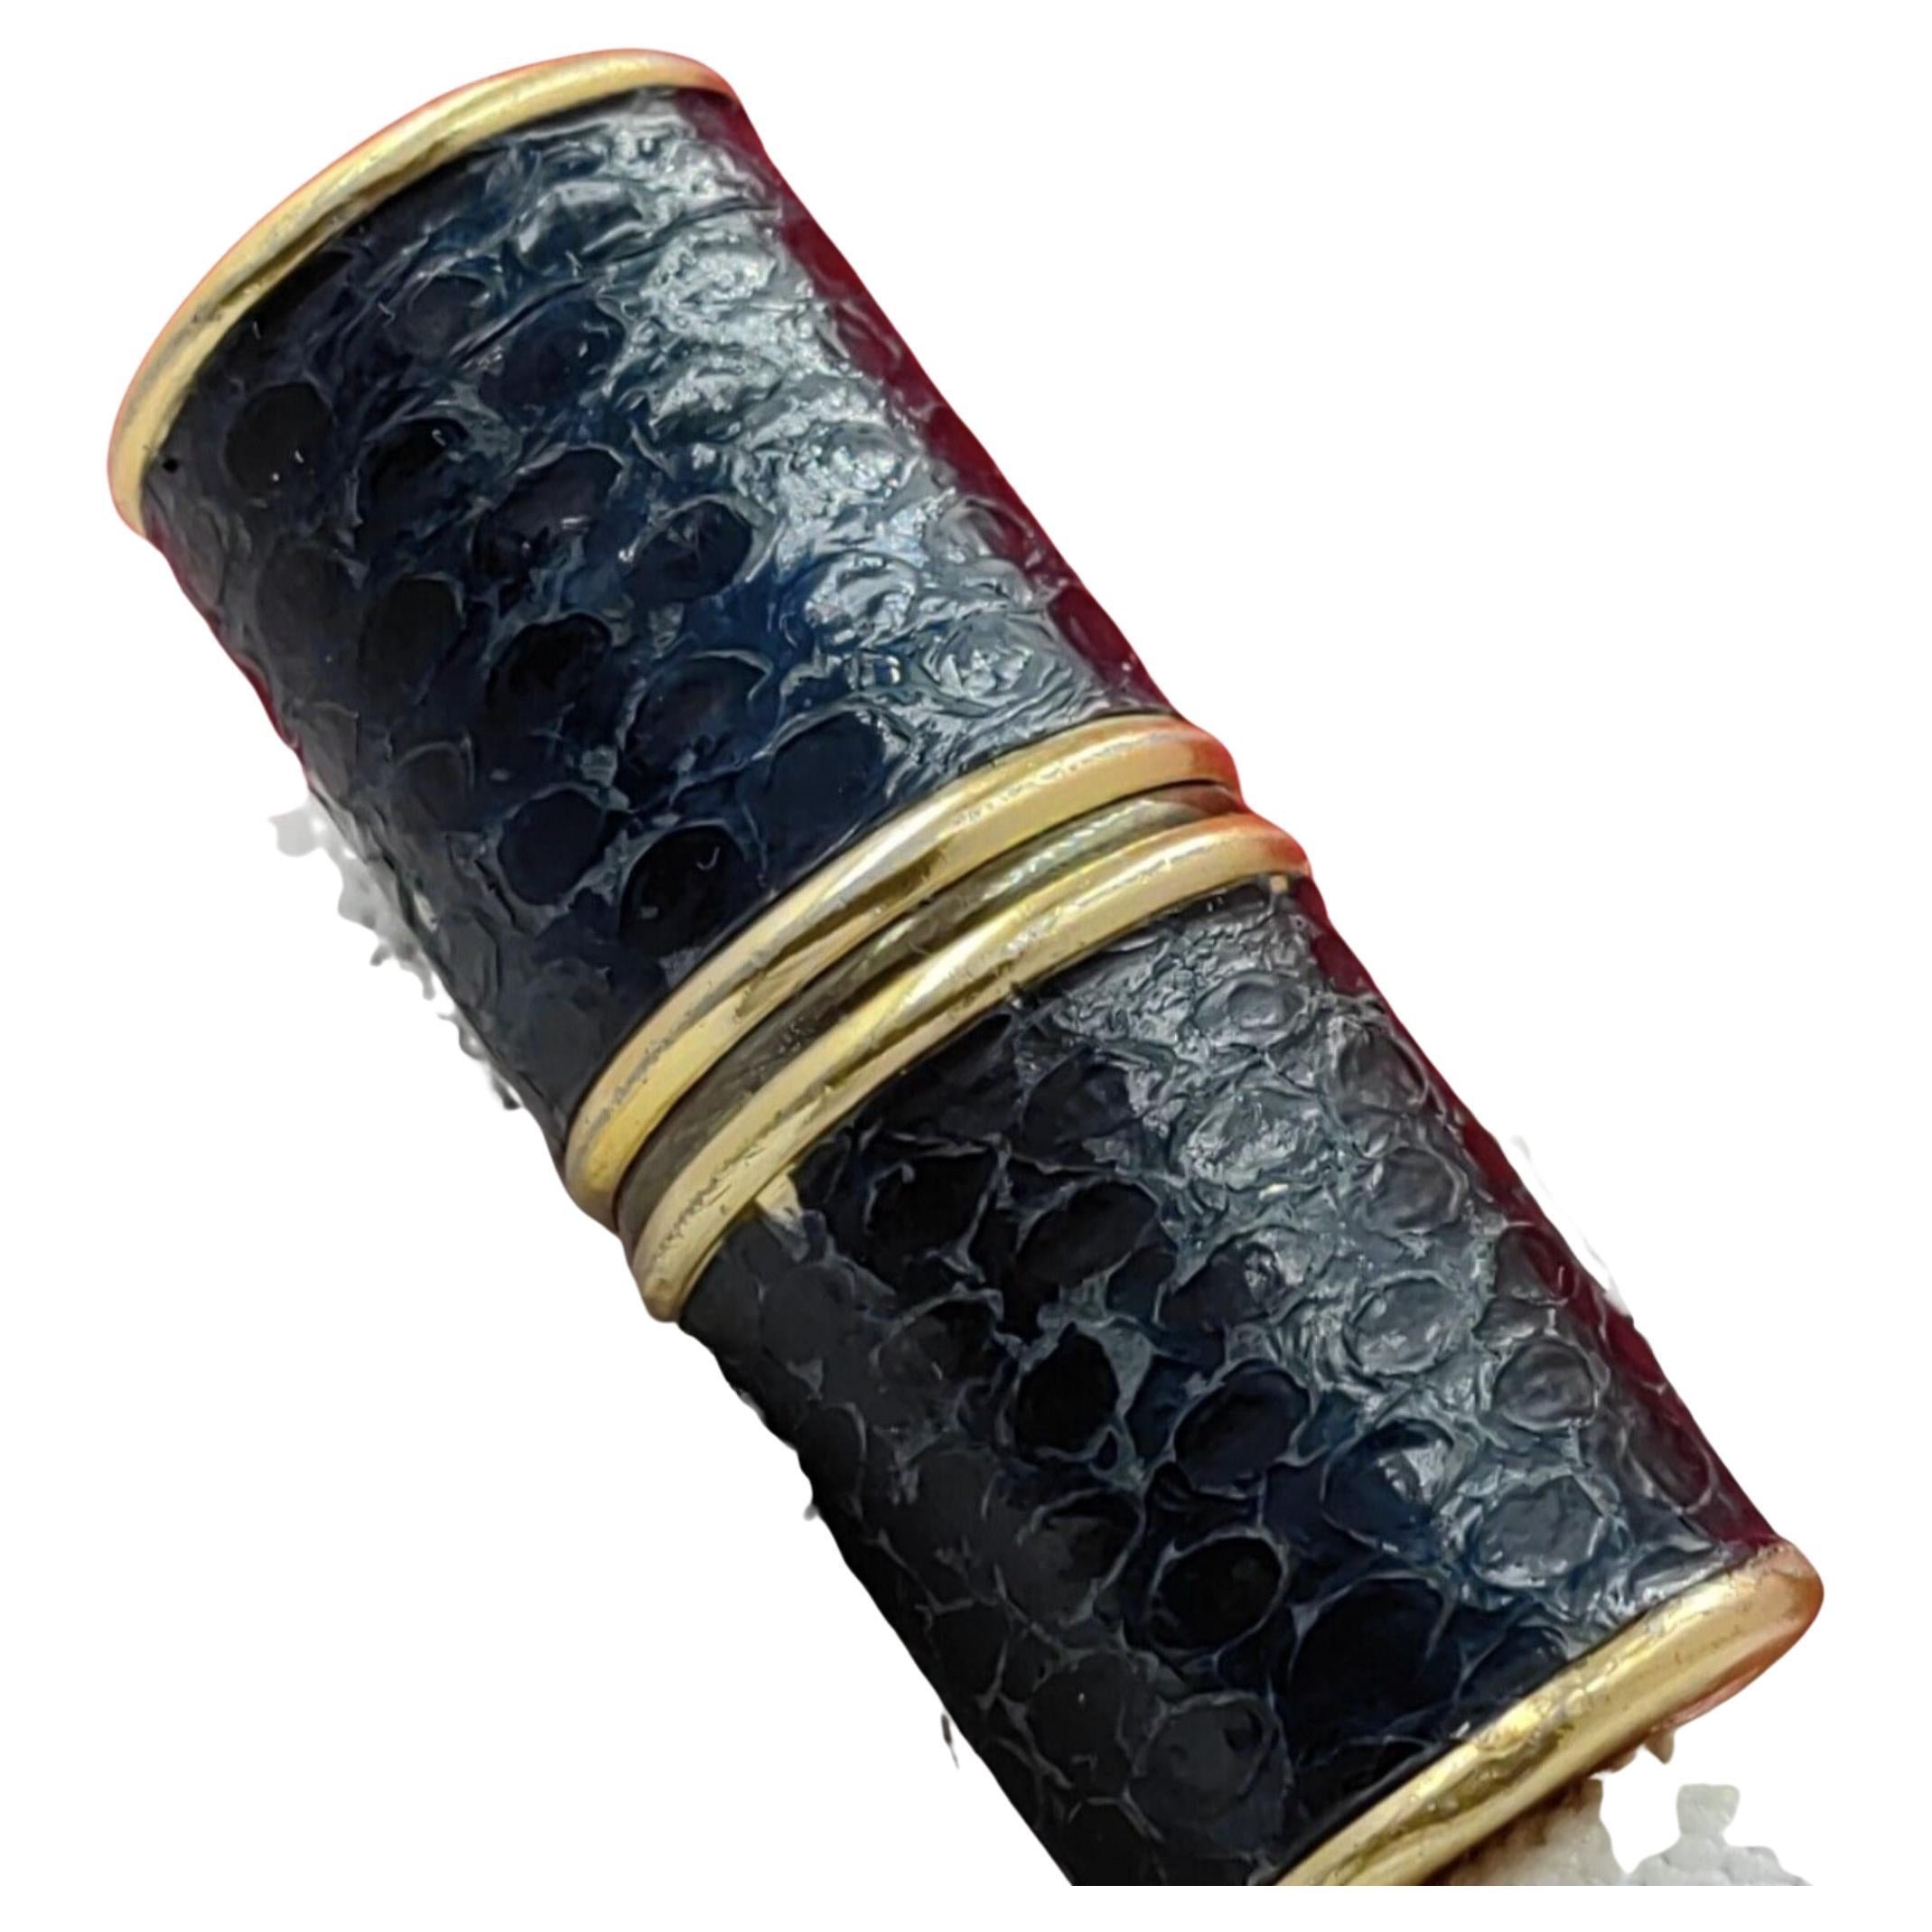 Very rare and hard to find a Mini Lipstick - QUART DE TOUR - made in France Vintage petrol lighter
Black snake skin 
Gold plated 
Lipstick shape
42 x 16 mm
Collectible
In working condition

A DESIRABLE COLLECTABLE A GOLD TONE METAL LIGHTER WITH